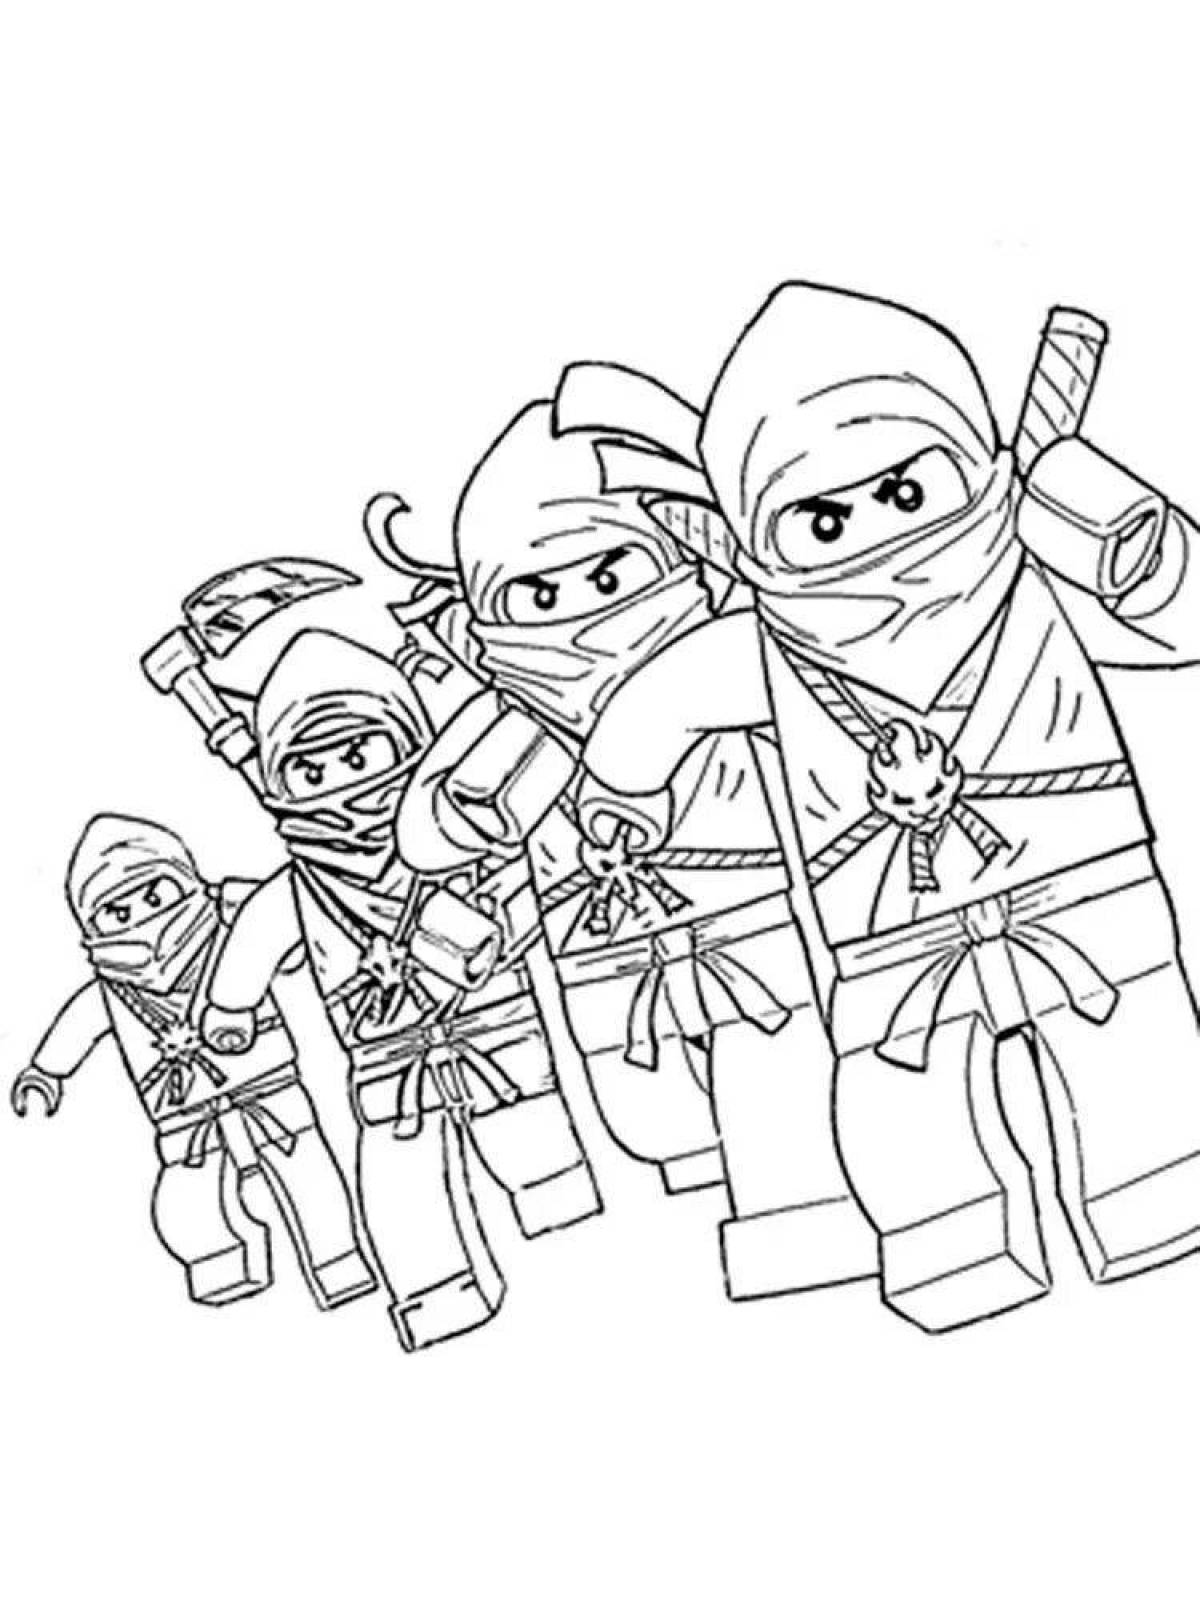 Lloyd's coloring page